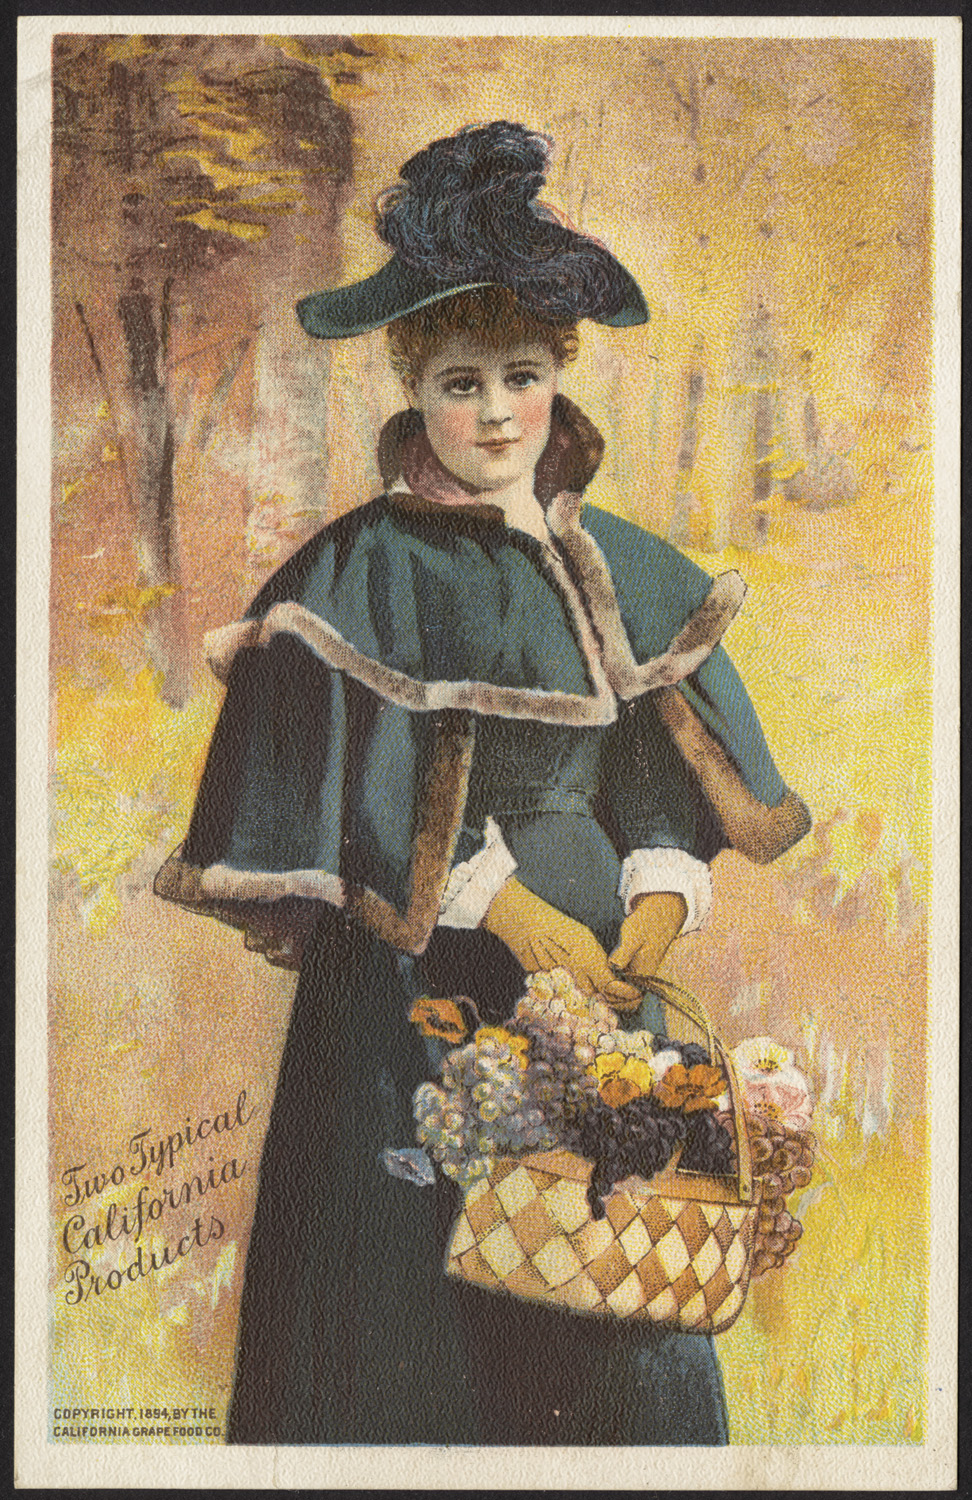 an old fashioned thanksgiving postcard features a pretty little girl holding an elaborate basket